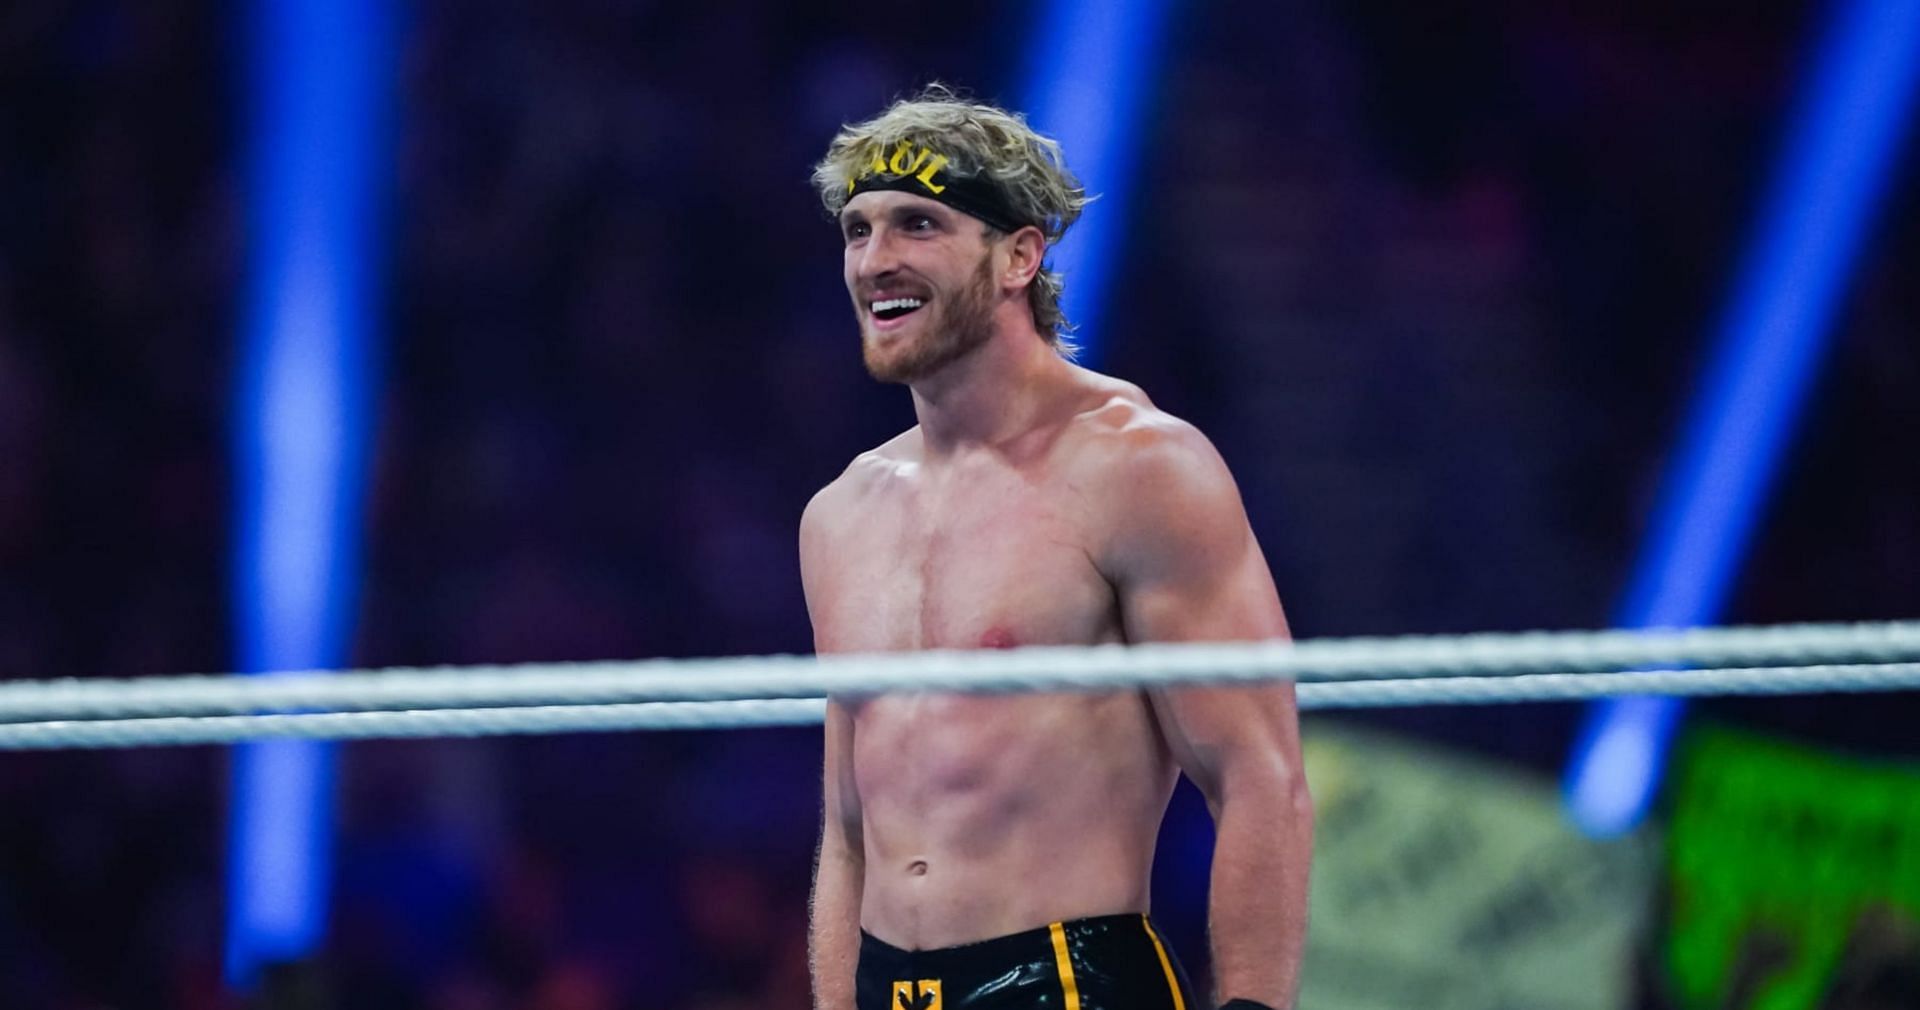 Logan Paul will compete in the final match of his current WWE contract at WrestleMania 39.